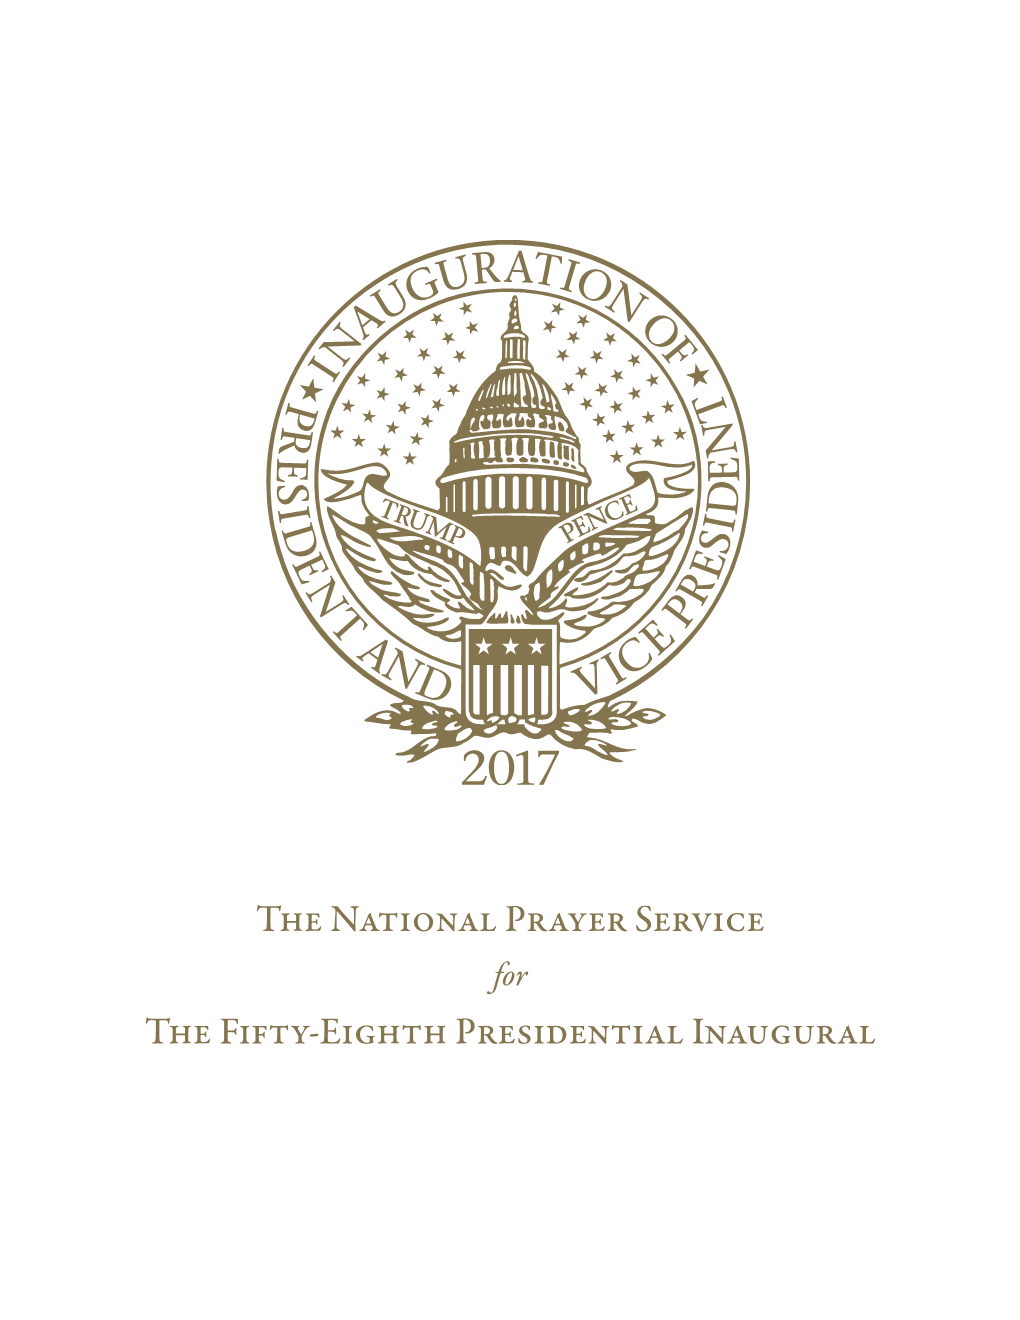 The National Prayer Service the Fifty-Eighth Presidential Inaugural